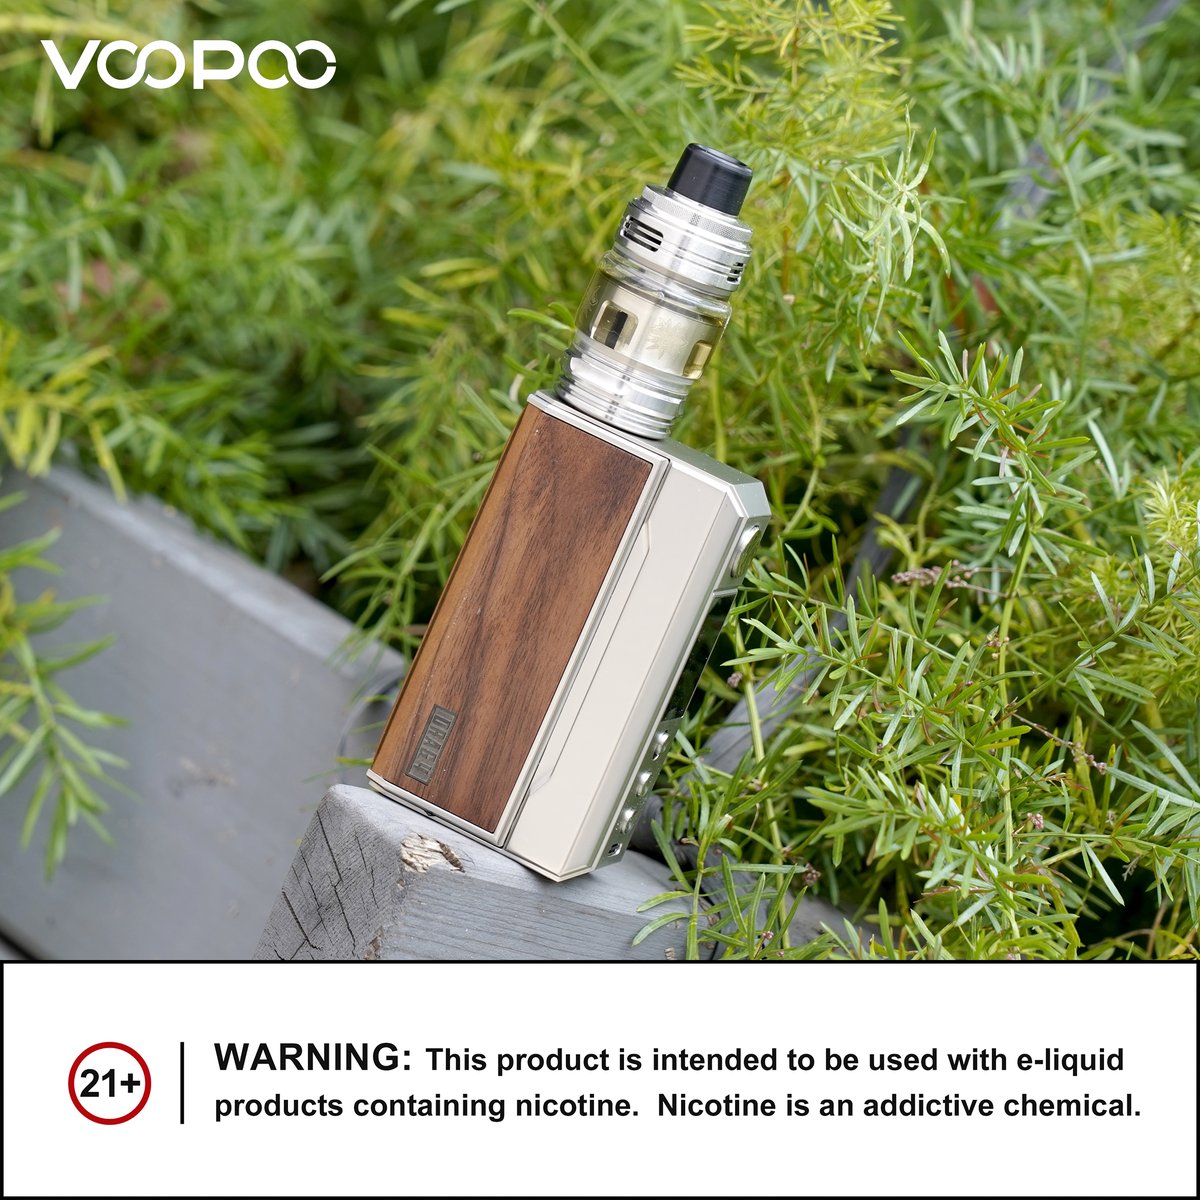 Drag 4 is your portable outdoor companion. Want to try? 😎

#voopoo #drag #voopoodragm100s #dragm100s #dragfamily #voopoodrag #voopoodragfamily #voopoodrag4 #drag4 #drag3 #drag2